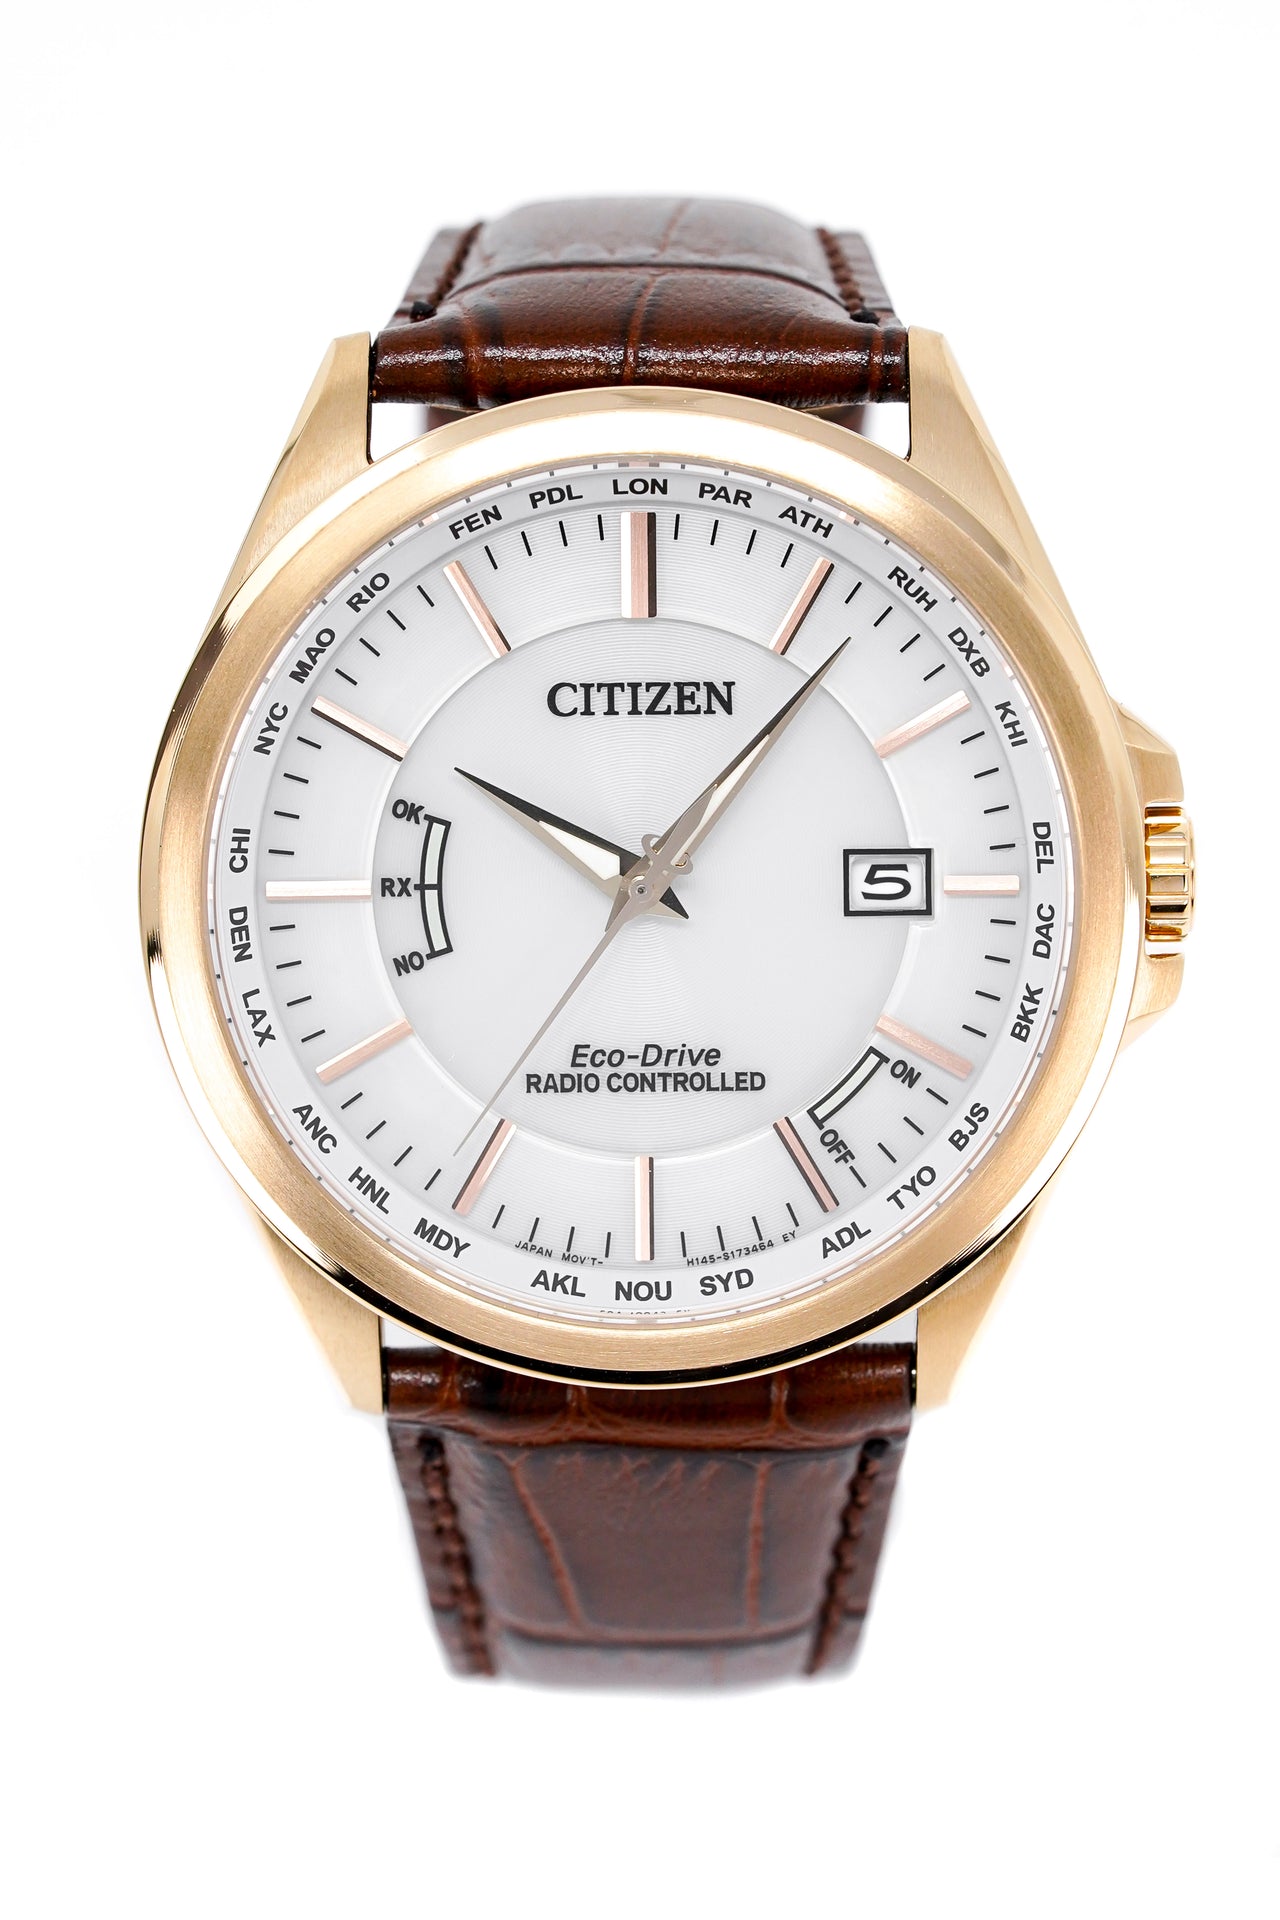 Citizen Eco-Drive Radio Controlled Men's Watch CB0253-19A